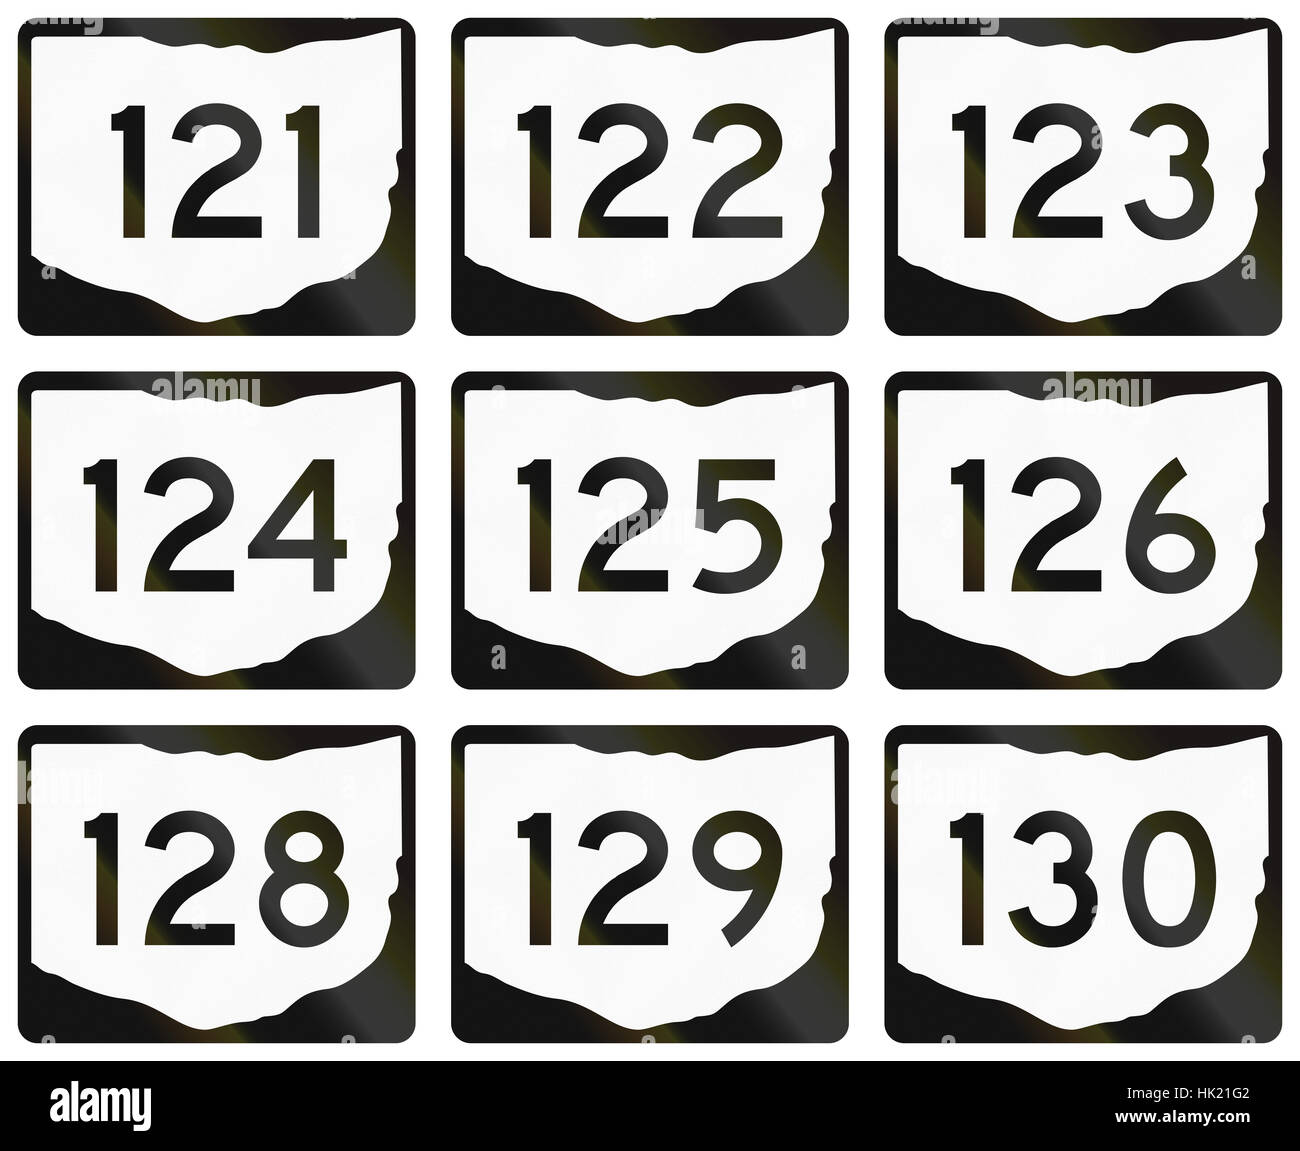 Collection of Ohio Route shields used in the United States. Stock Photo